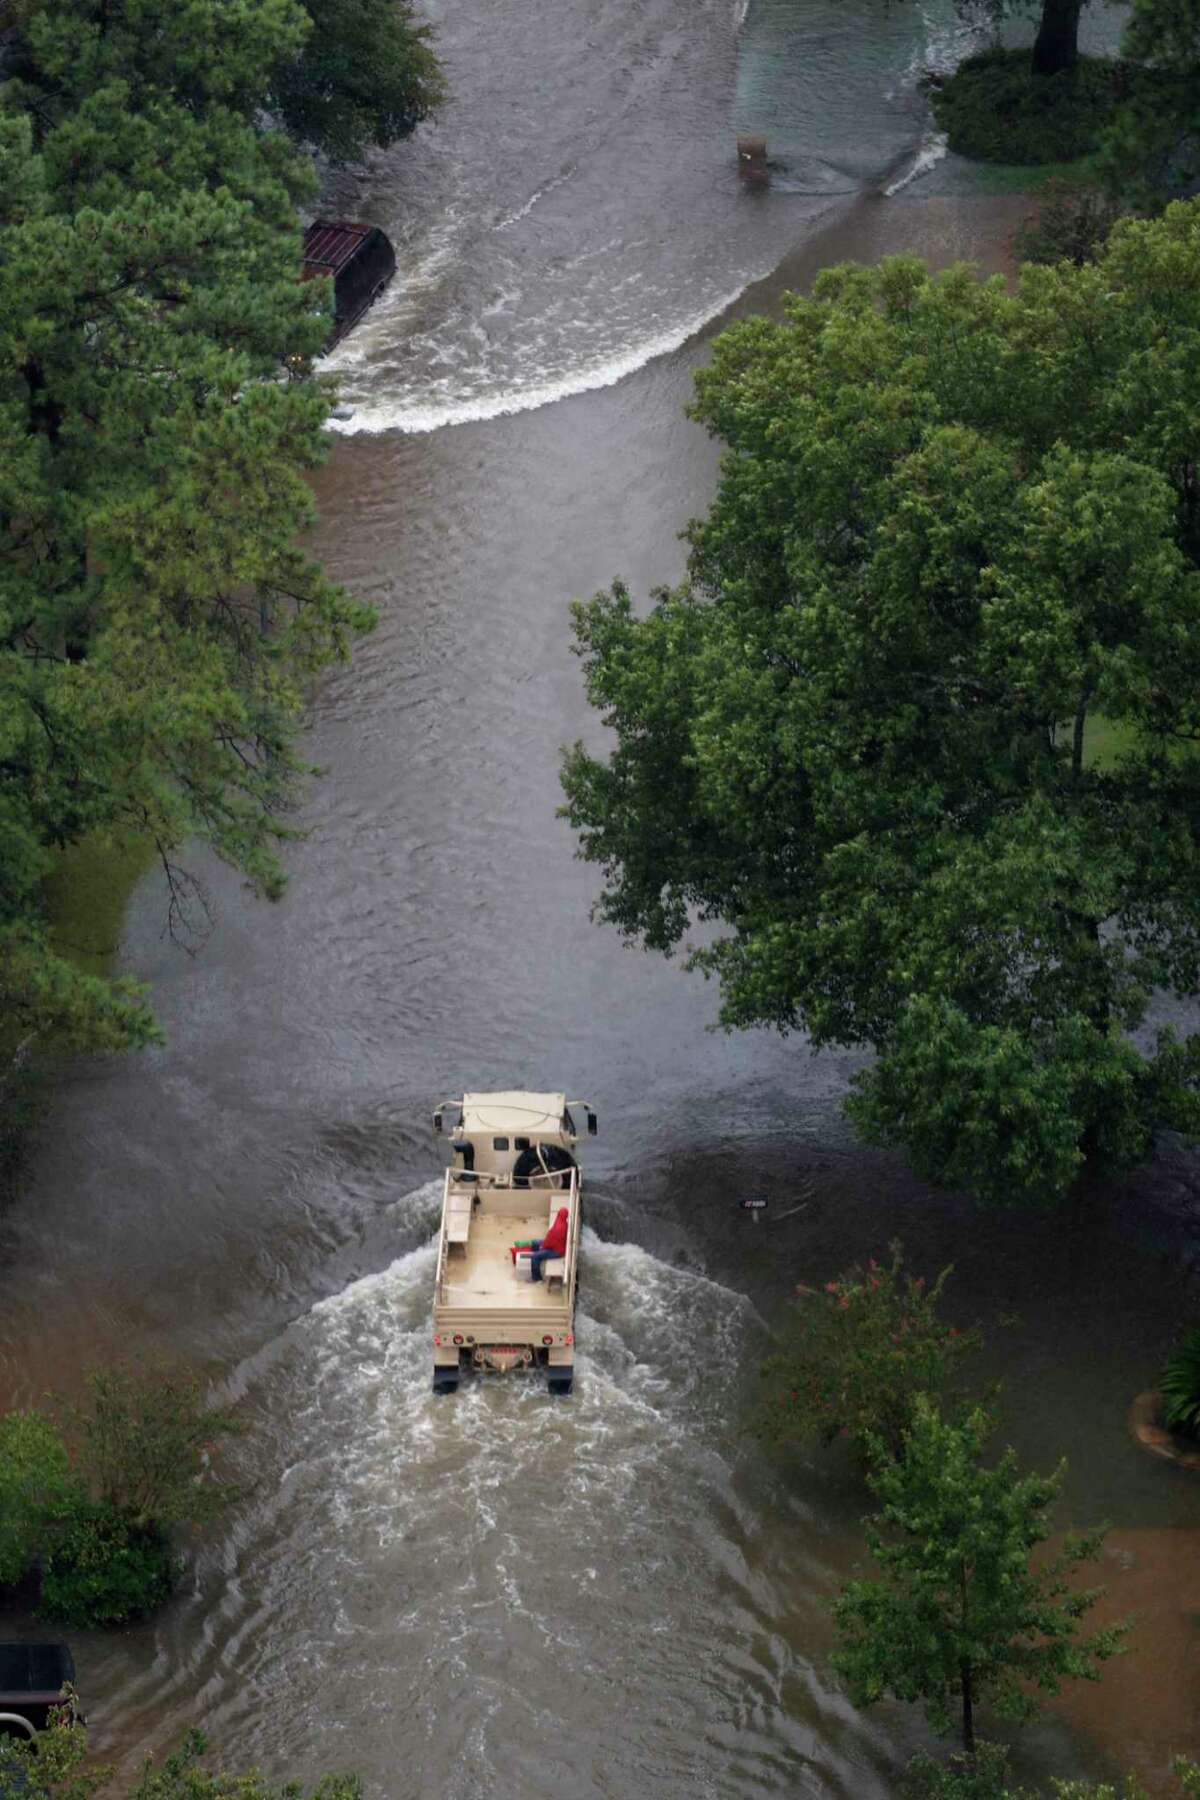 A rescue vehicle drives through a neighborhood off Cypress Creek as floodwaters rise from Tropical Storm Harvey on Tuesday, Aug. 29, 2017, in Houston. ( Brett Coomer / Houston Chronicle )